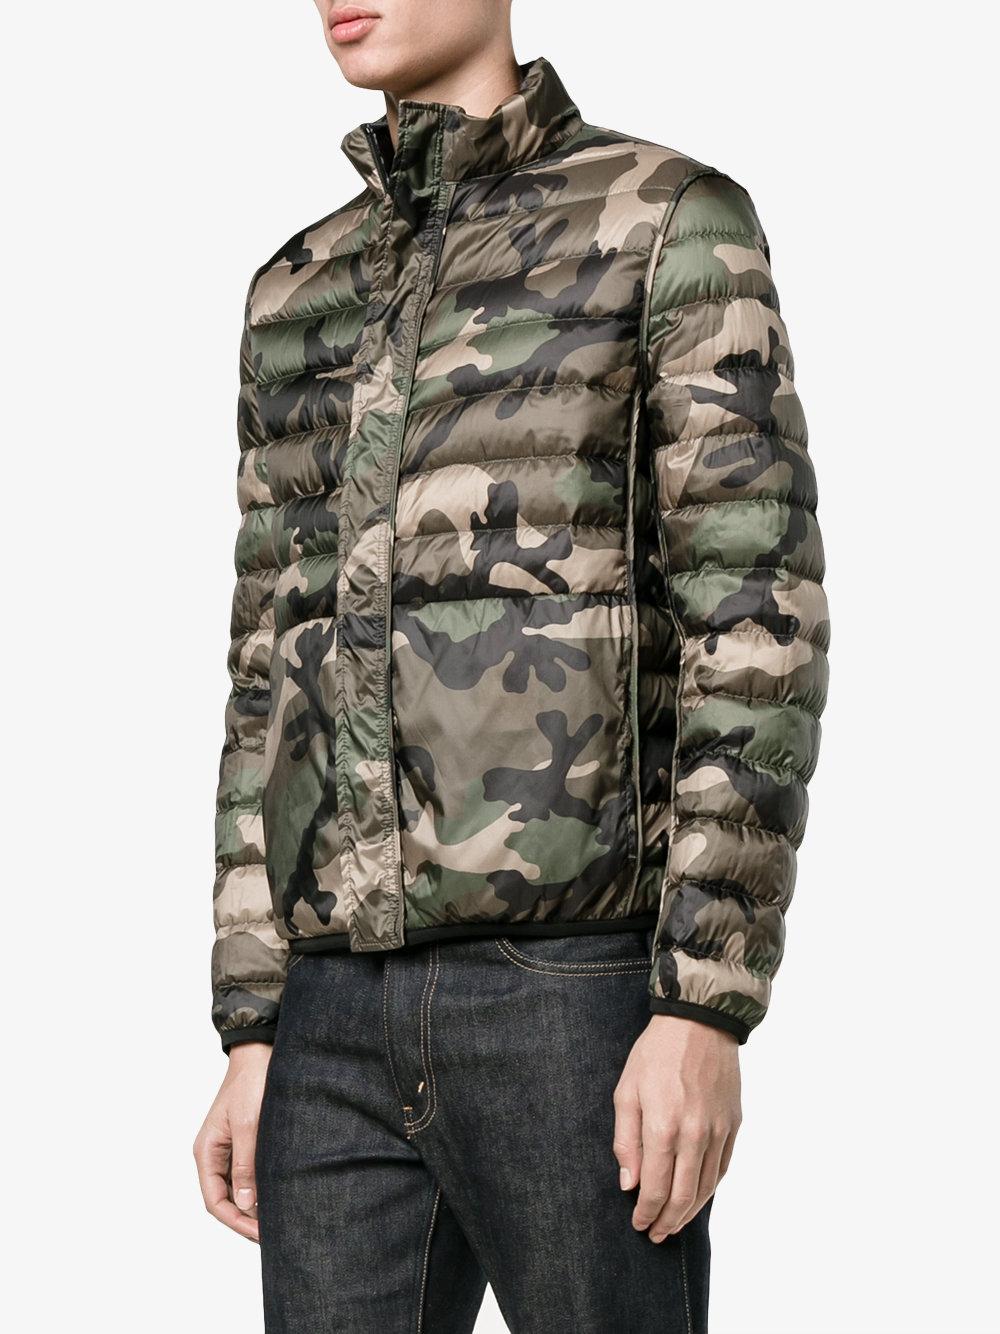 Lyst - Valentino Reversible Camouflage Jacket in Blue for Men